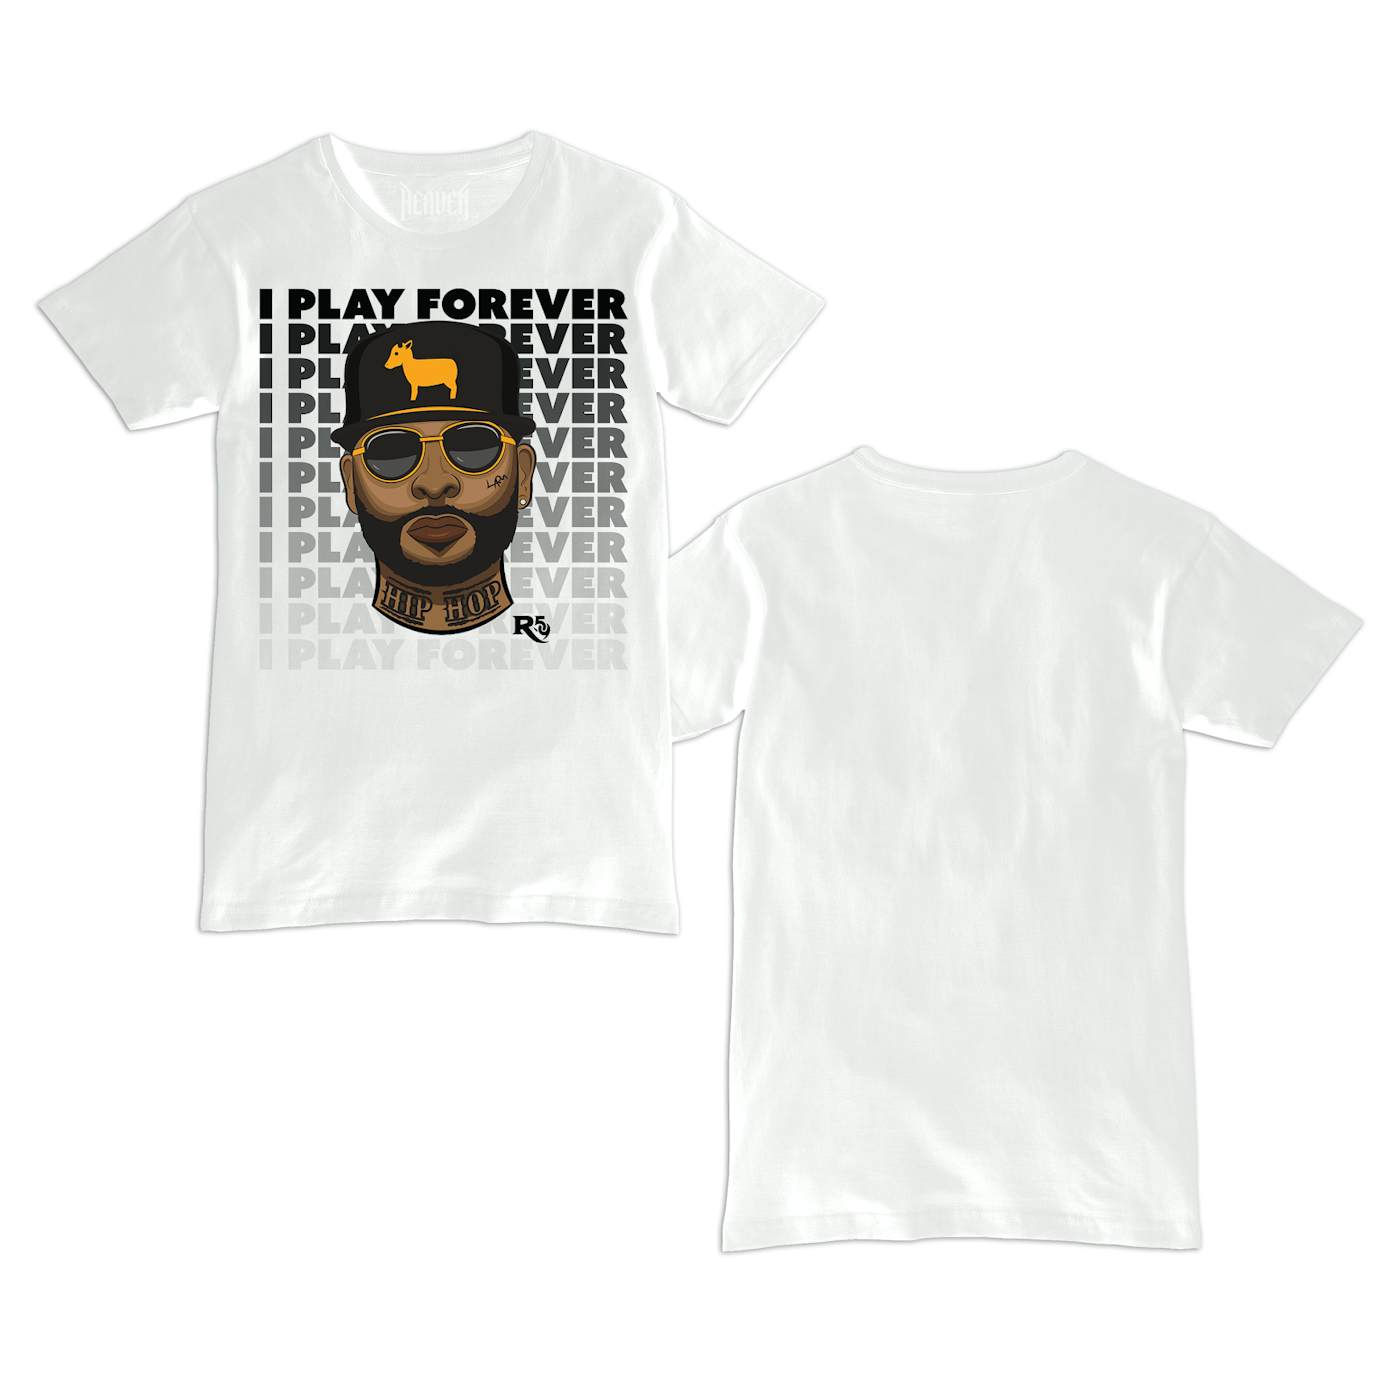 Royce Da 5'9" GRAMMY EDITION " I PLAY FOREVER" T SHIRT (LIMITED)